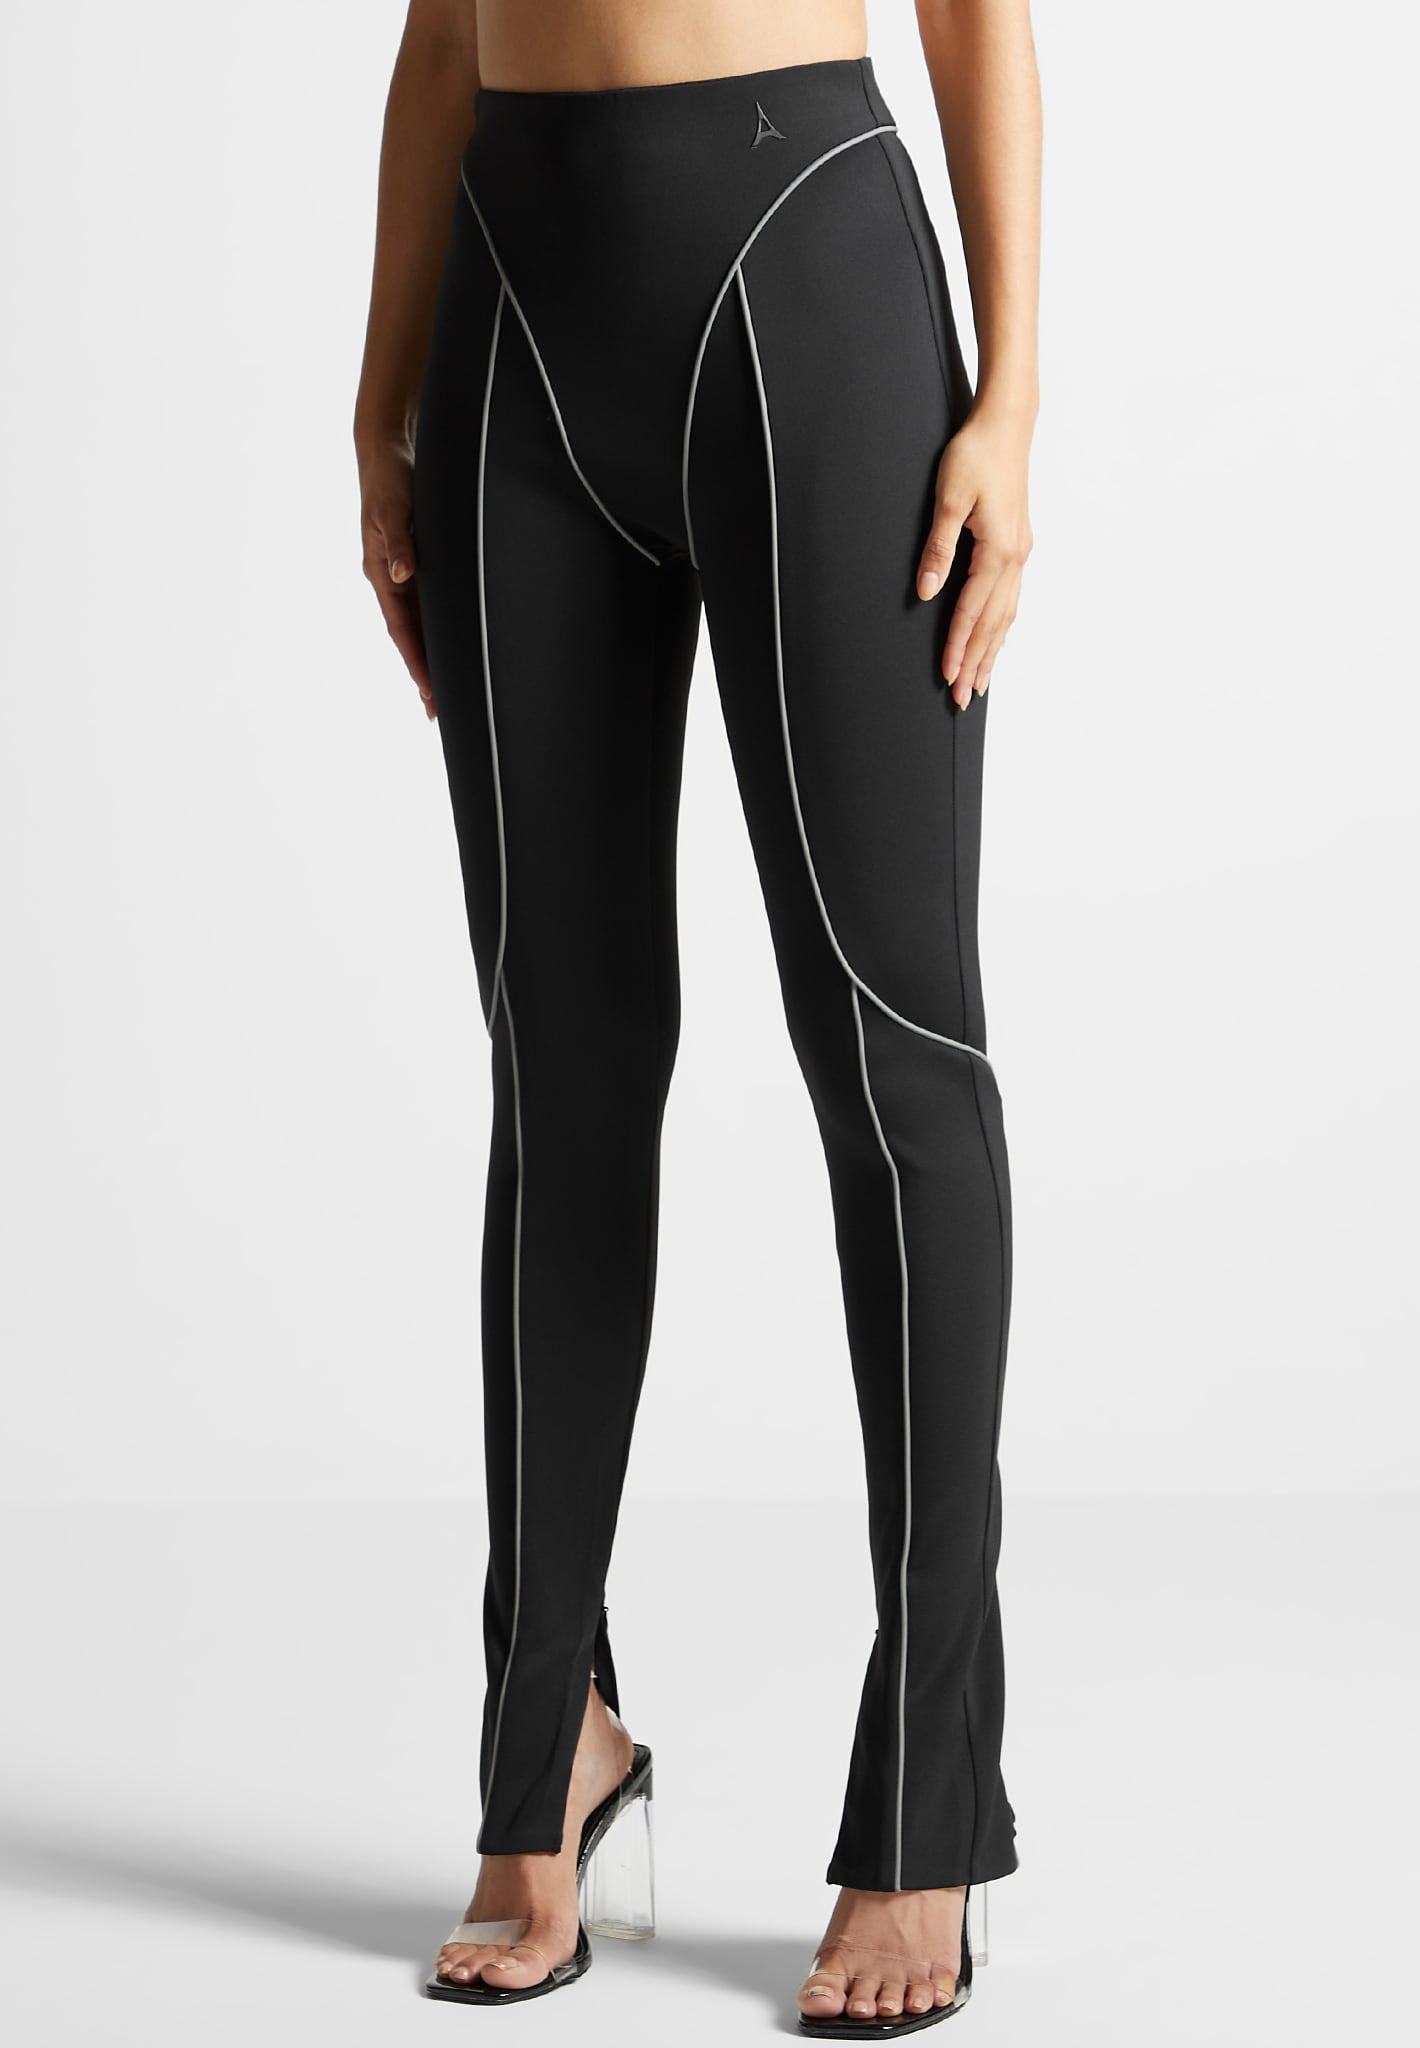 Self Reflection Reflective High Waisted Leggings in Grey & Neon